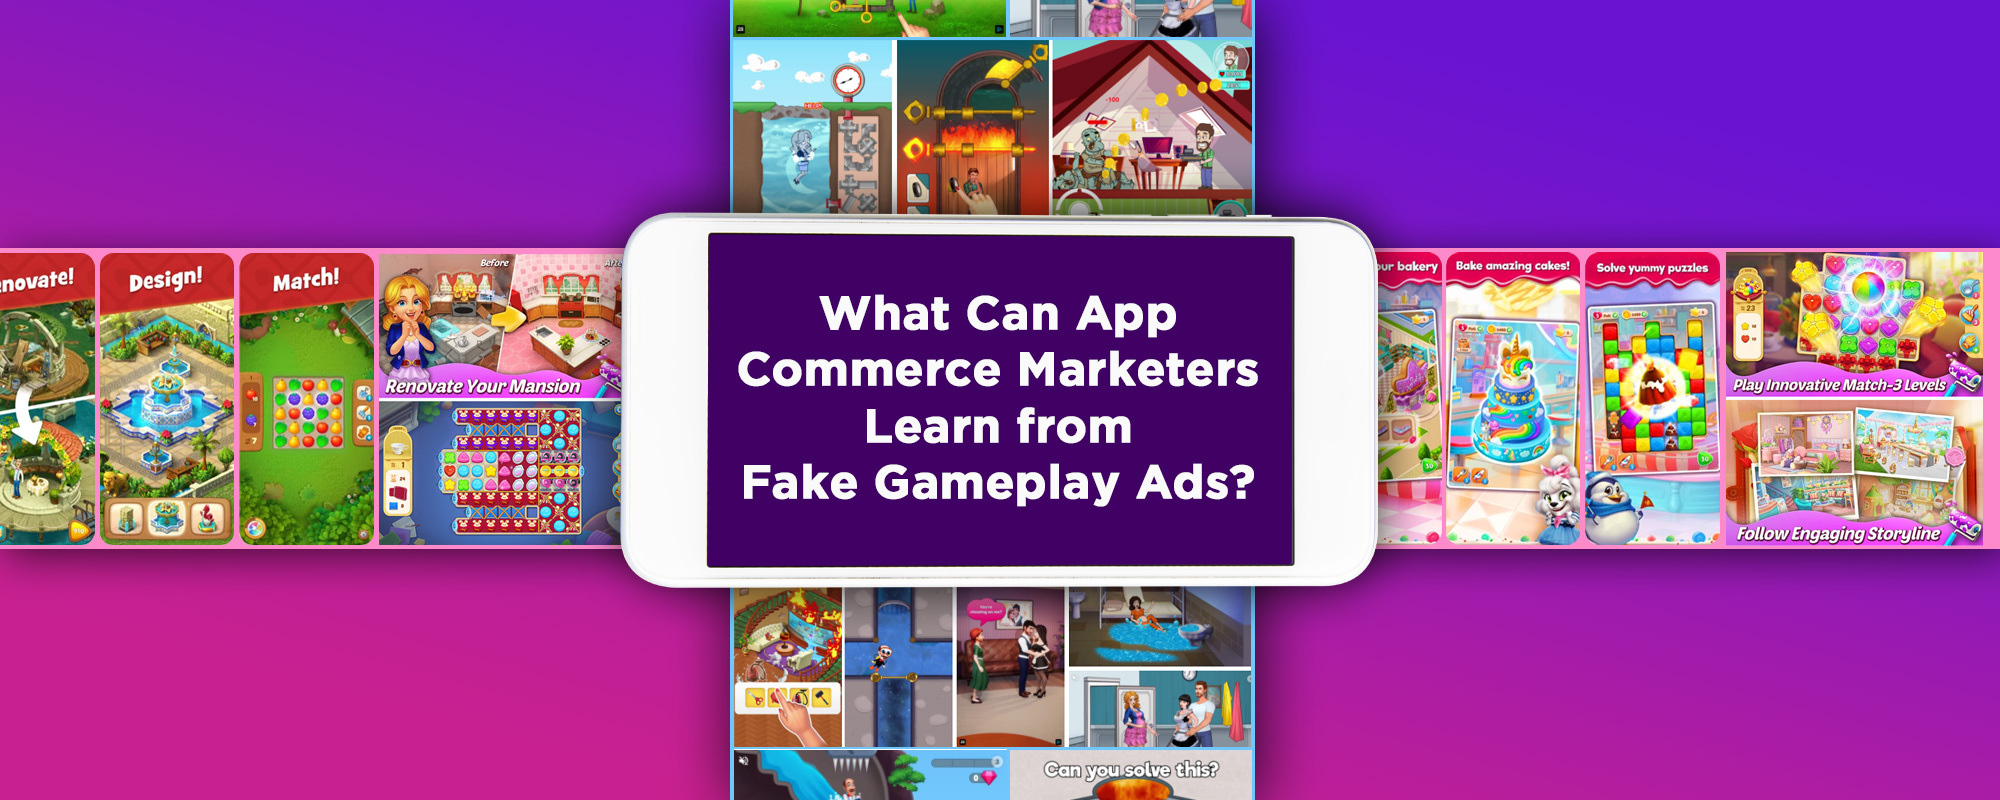 What Can App Commerce Marketers Learn From Fake Gameplay Ads?